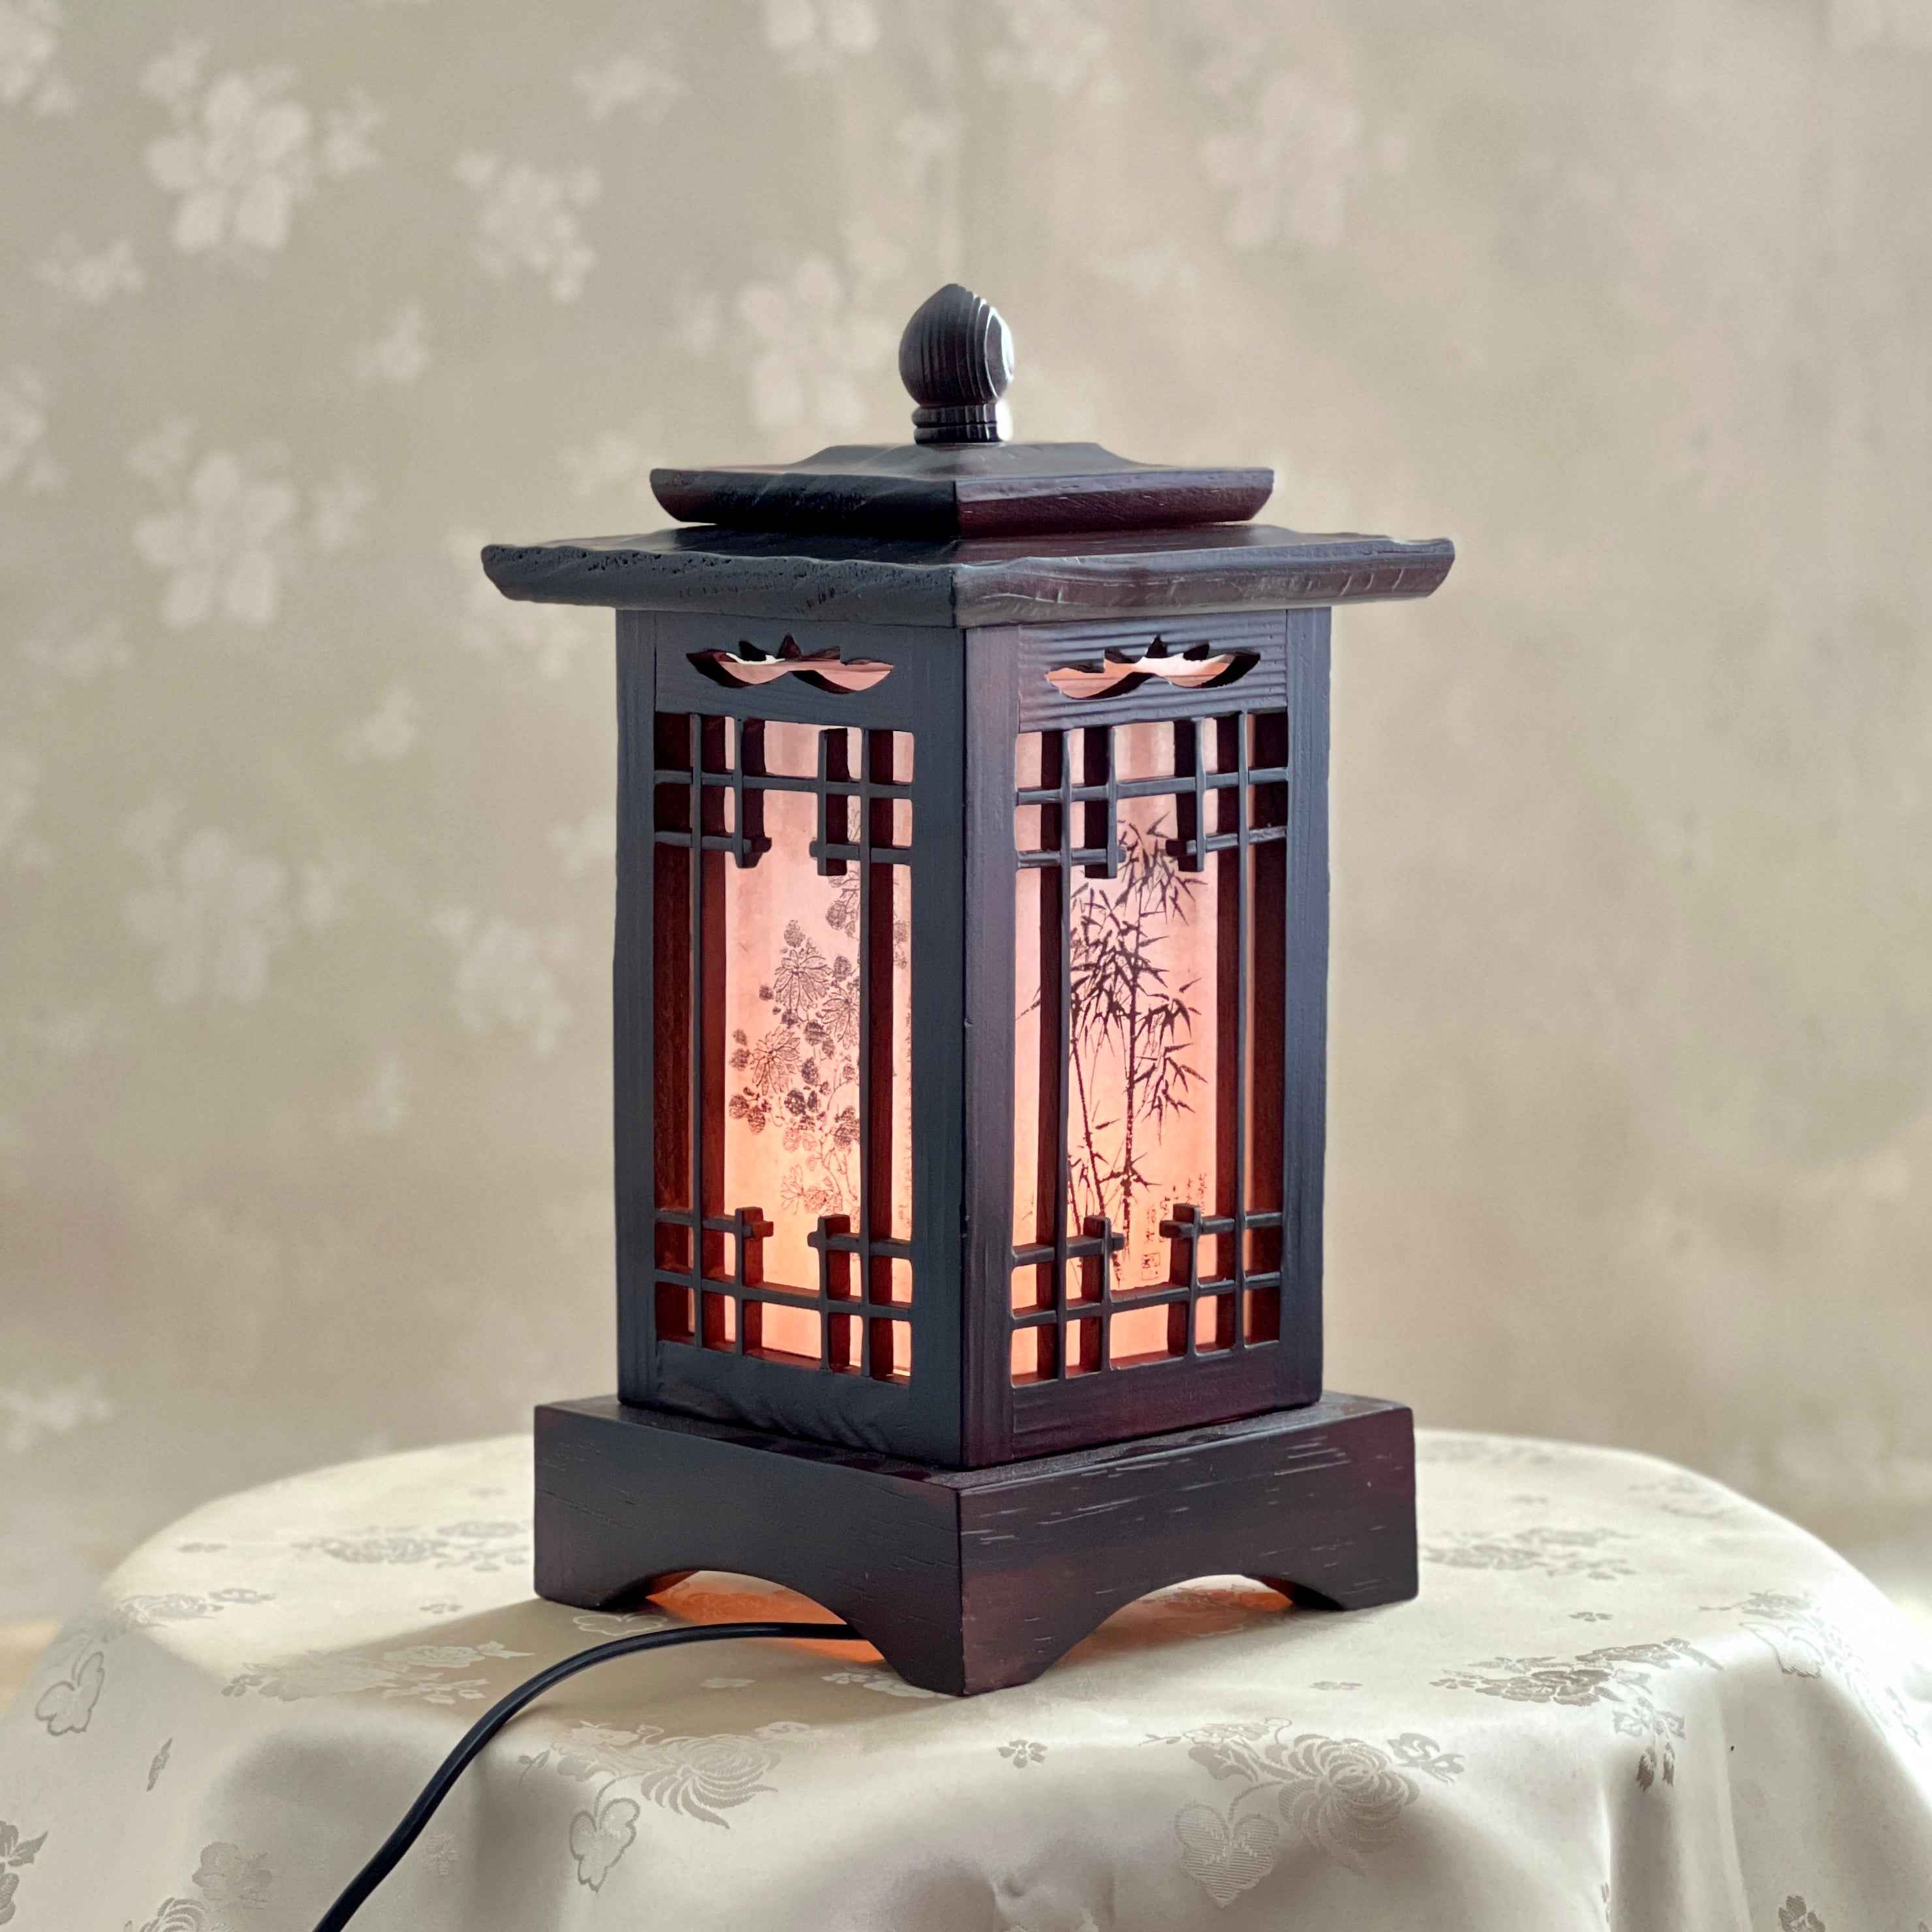 Front view of a handmade Korean traditional wooden table lamp with a square pagoda-shaped roof and Sagunja patterns.